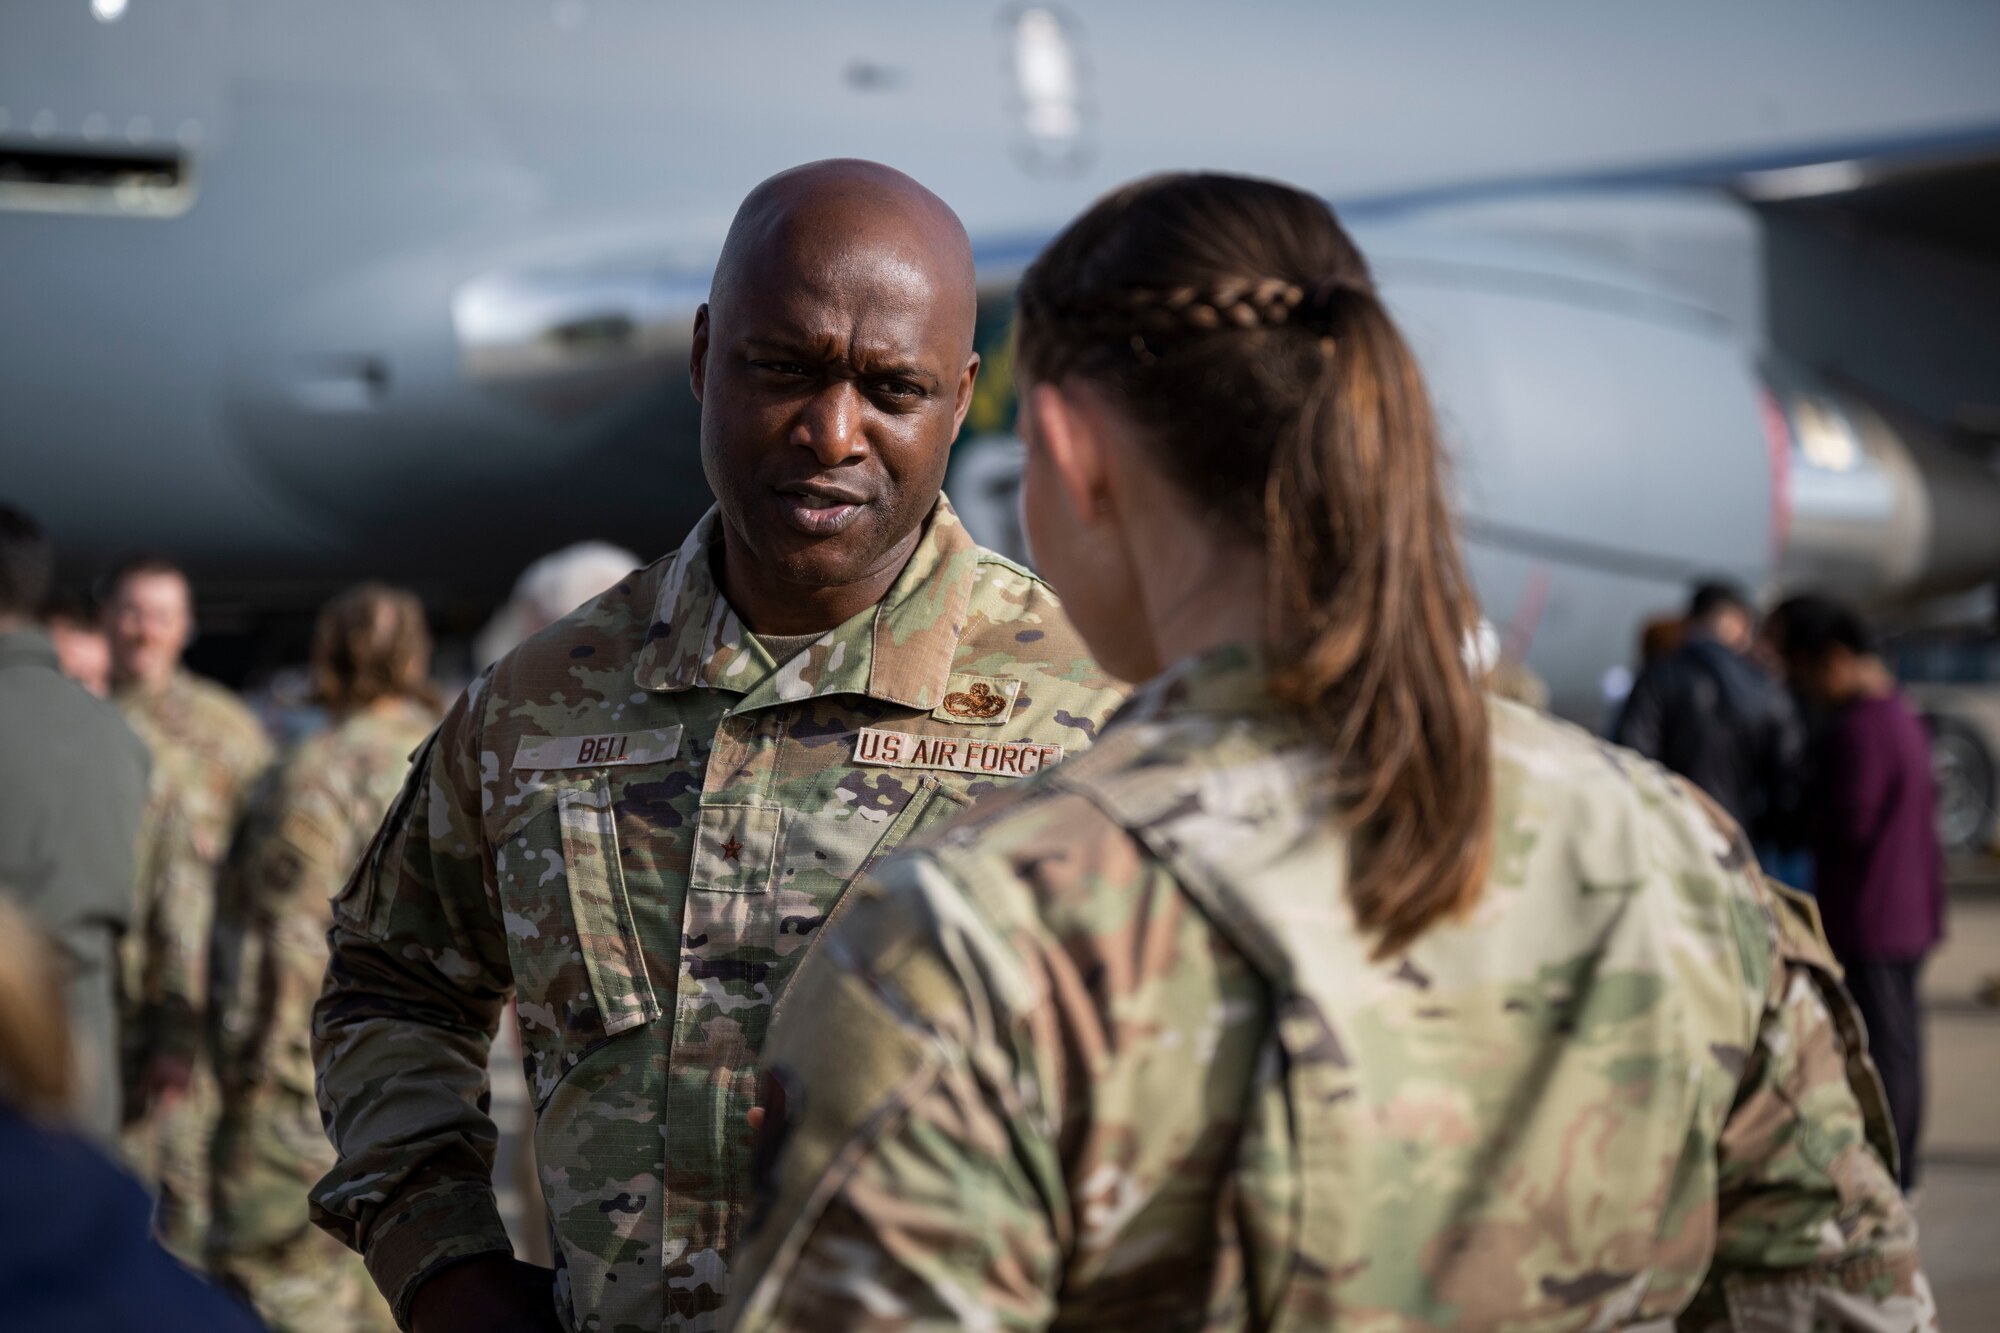 Brig. Gen. Kenyon Bell, Air Force Global Strike Command director of logistics and engineering, speaks with Airman 1st Class Triniti Marhafer, 334th Fighter Squadron command support section apprentice, during Strive 4th: A Project Tuskegee and aviation inspiration mentorship initiative at Seymour Johnson Air Force Base, North Carolina, Nov. 4, 2022. Project Tuskegee aims to expose men and women to the many opportunities within AFGSC, to reinforce the historical connection between the Tuskegee Airmen and AFGSC, and to create a culture of unity that welcomes talent from all walks of life to the U.S. Air Force.